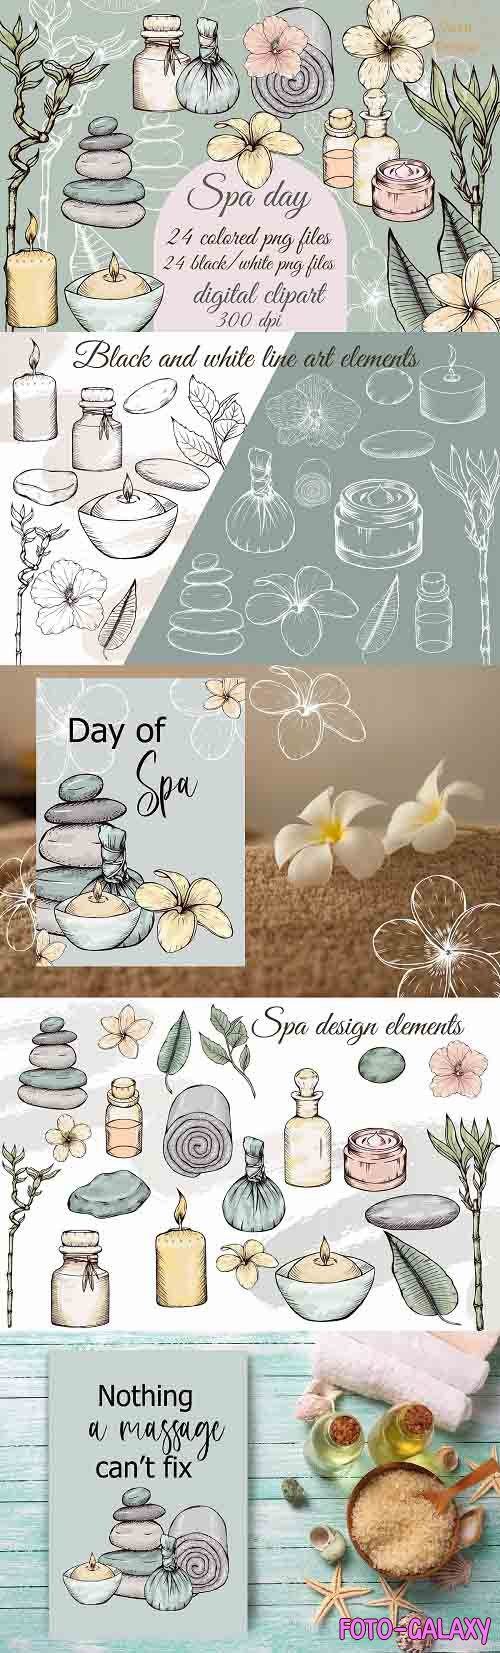 Spa day clipart, wellness png, beauty and selfcare clip art - 1411309